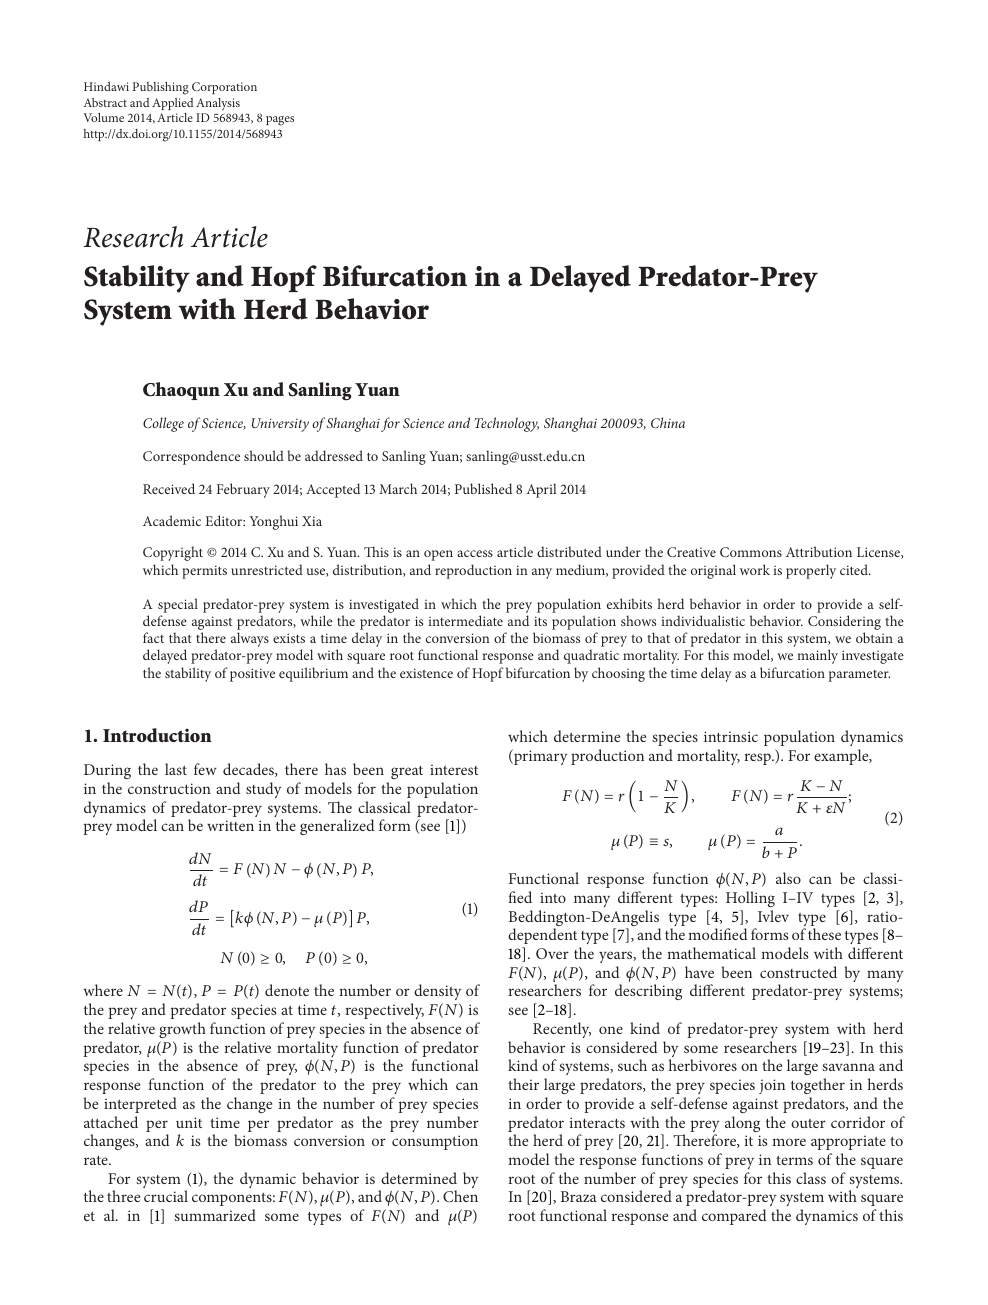 Stability And Hopf Bifurcation In A Delayed Predator Prey System With Herd Behavior Topic Of Research Paper In Mathematics Download Scholarly Article Pdf And Read For Free On Cyberleninka Open Science Hub